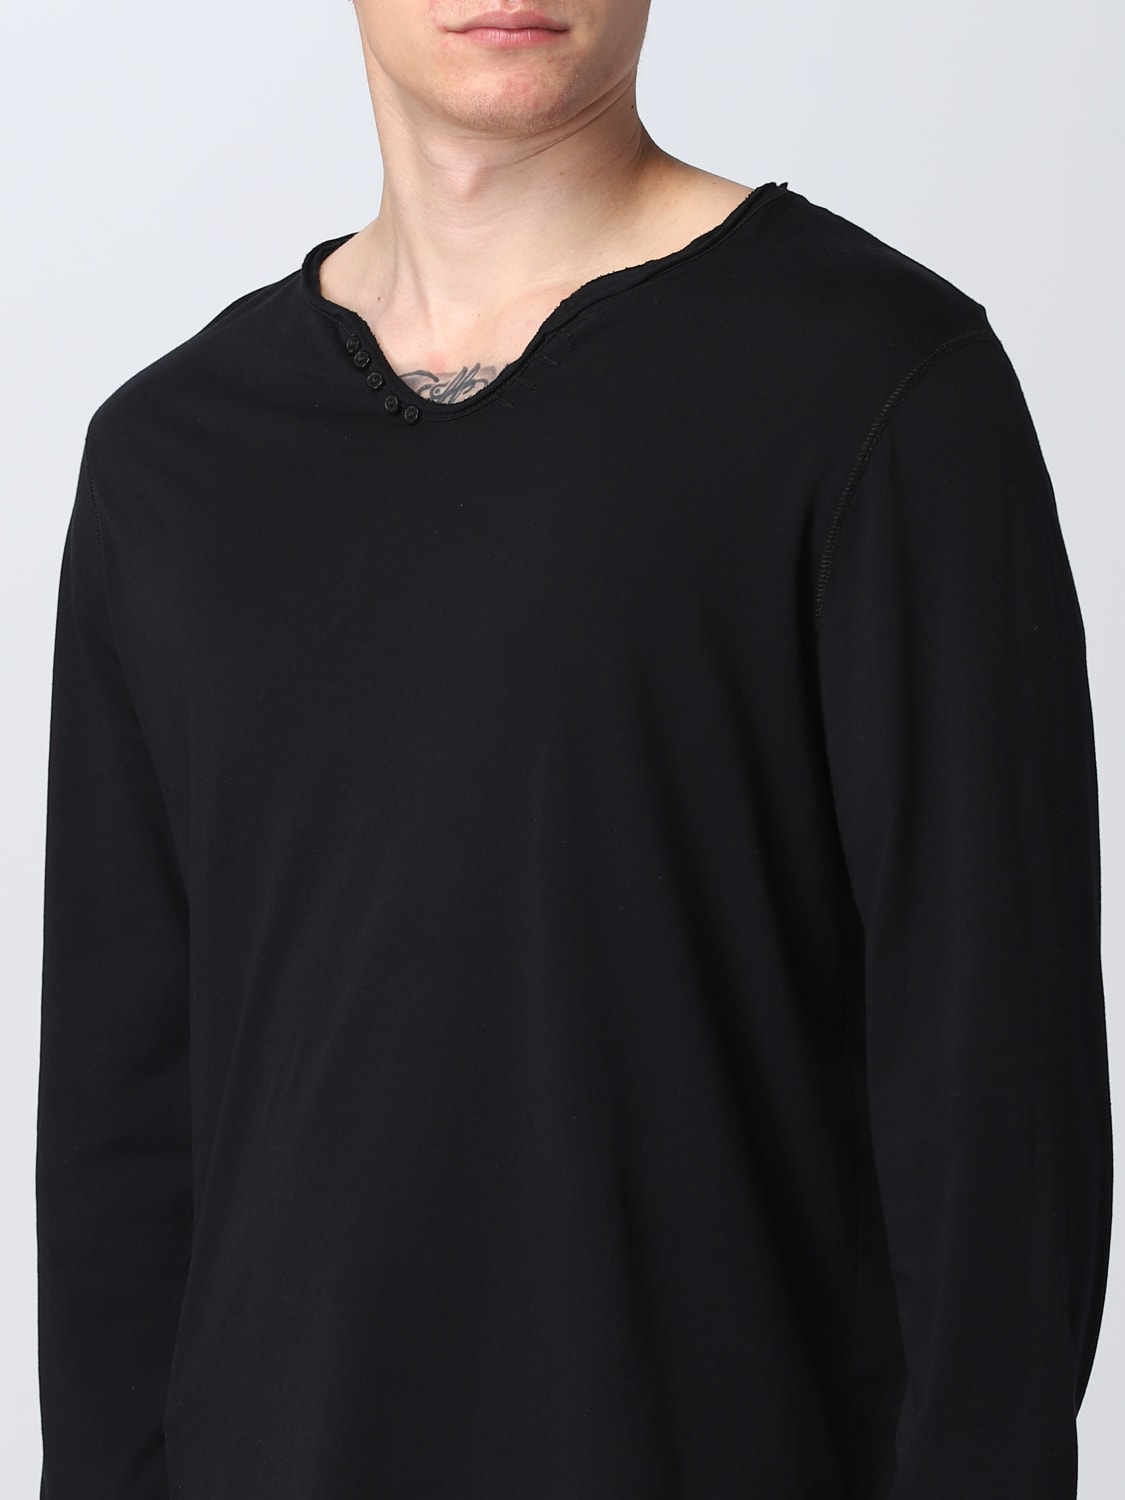 ZADIG & VOLTAIRE: t-shirt for man - Black | Zadig & Voltaire t-shirt ...